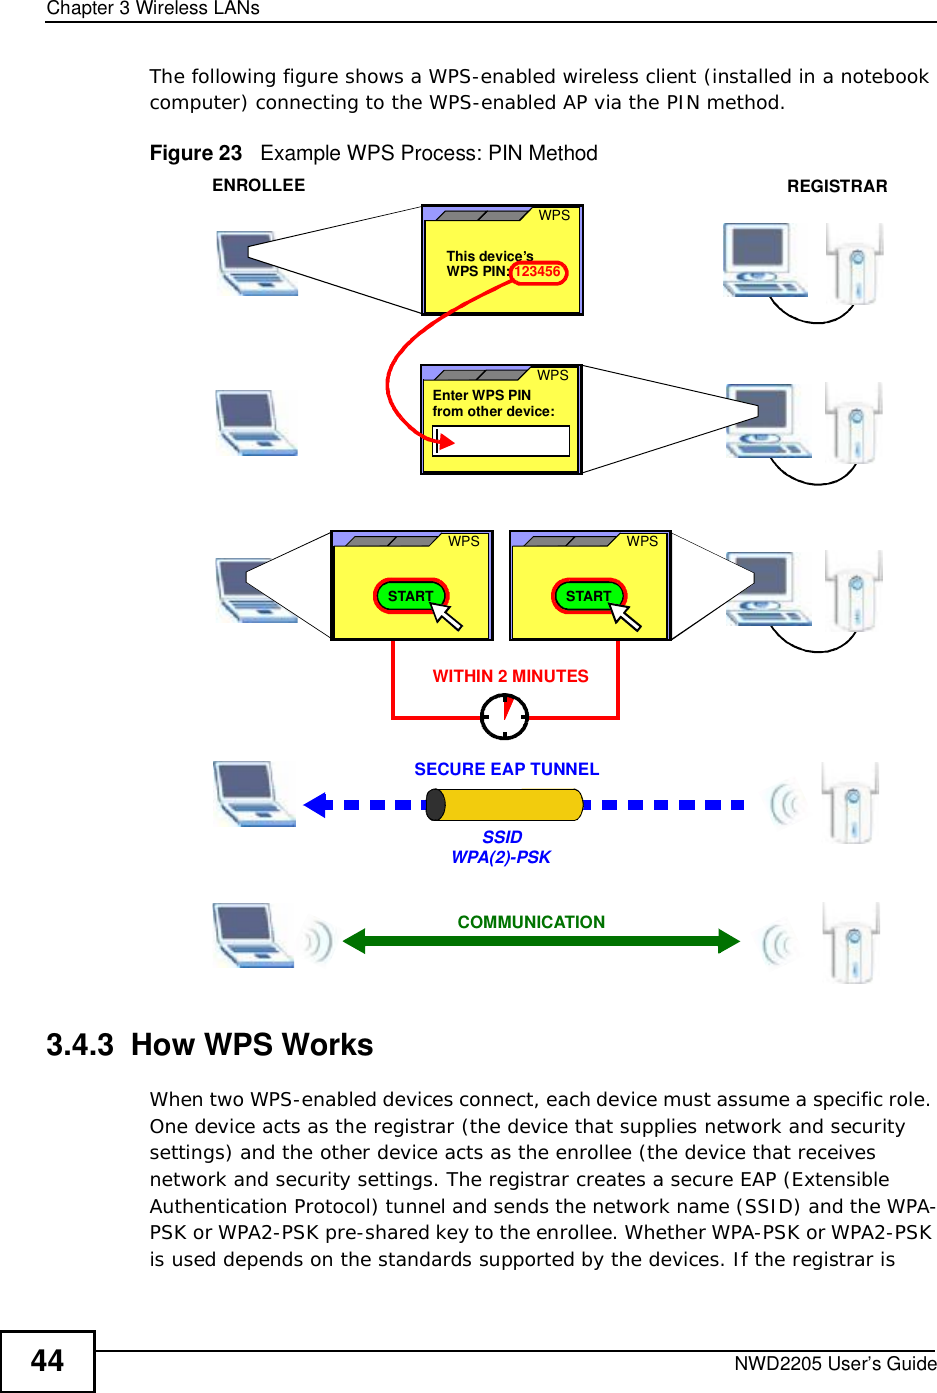 Chapter 3Wireless LANsNWD2205 User’s Guide44The following figure shows a WPS-enabled wireless client (installed in a notebook computer) connecting to the WPS-enabled AP via the PIN method.Figure 23   Example WPS Process: PIN Method3.4.3  How WPS WorksWhen two WPS-enabled devices connect, each device must assume a specific role. One device acts as the registrar (the device that supplies network and security settings) and the other device acts as the enrollee (the device that receives network and security settings. The registrar creates a secure EAP (Extensible Authentication Protocol) tunnel and sends the network name (SSID) and the WPA-PSK or WPA2-PSK pre-shared key to the enrollee. Whether WPA-PSK or WPA2-PSK is used depends on the standards supported by the devices. If the registrar is ENROLLEESECURE EAP TUNNELSSIDWPA(2)-PSKWITHIN 2 MINUTESCOMMUNICATIONThis device’s WPSEnter WPS PIN  WPSfrom other device: WPS PIN: 123456WPSSTARTWPSSTARTREGISTRAR